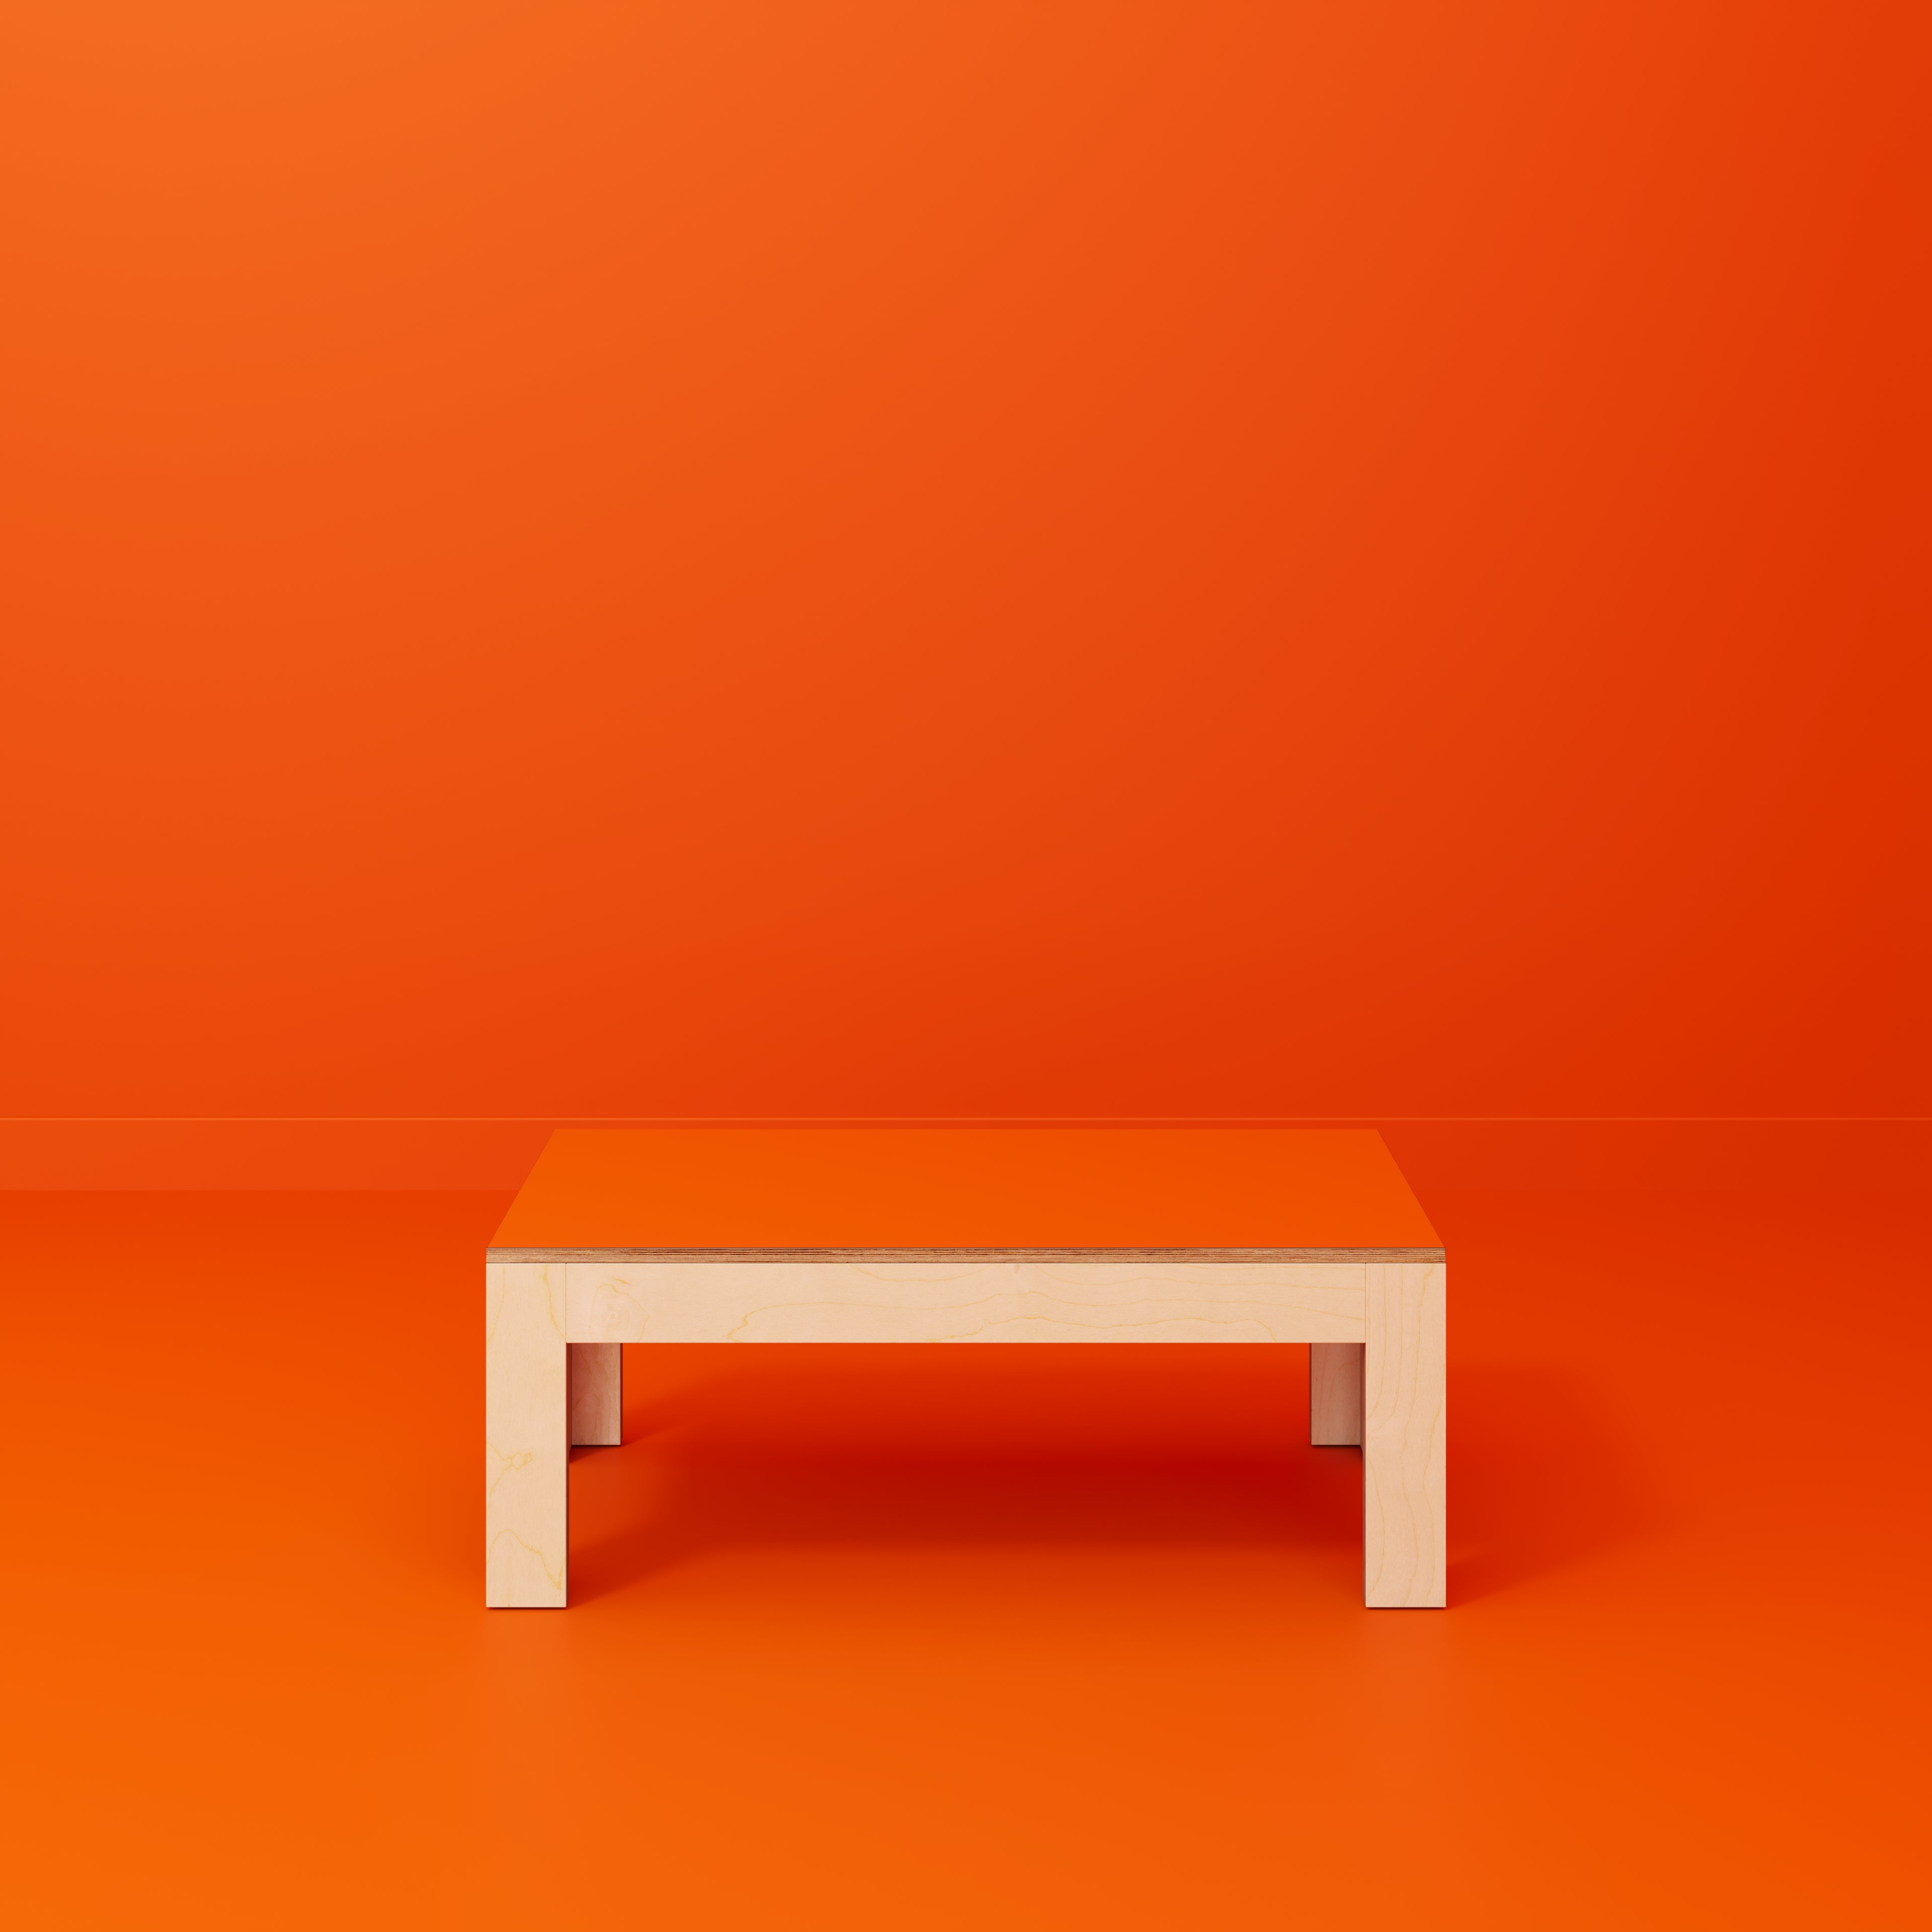 Coffee Table with Solid Frame - Formica Levante Orange - 1200(w) x 600(d) x 450(h)